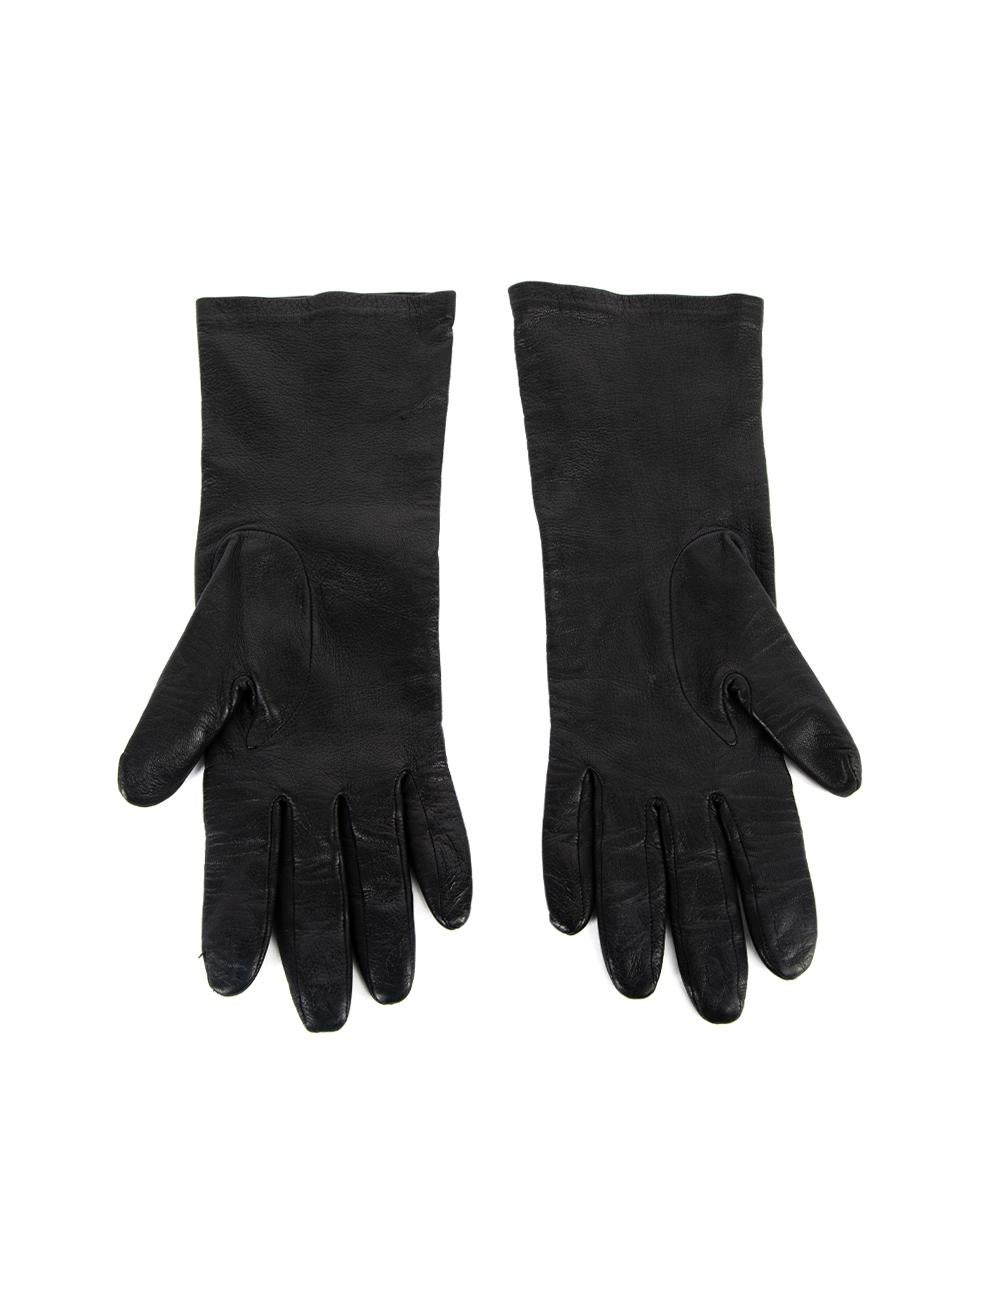 CONDITION is Very good. Minimal wear to gloves is evident. Minimal wear to exterior leather on this used Balenciaga designer resale item. Details Black Leather Gloves Logo printed on right hand Silk lining Made in France Composition 100% Leather